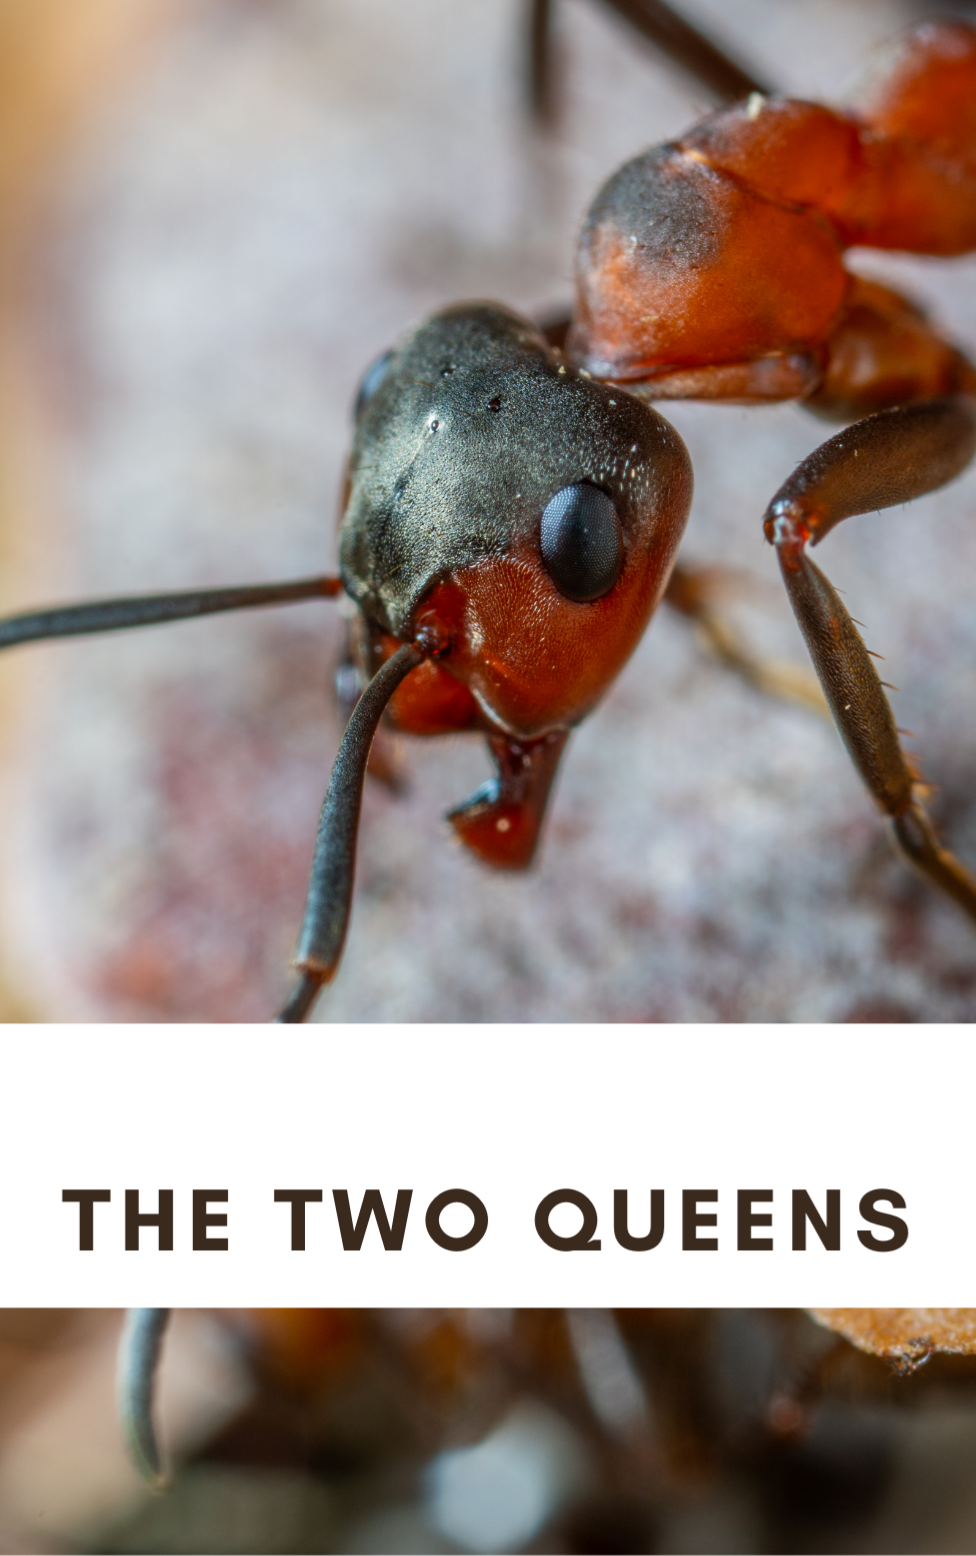 An image of an ant in the background, with “The Two Queens” written in the foreground